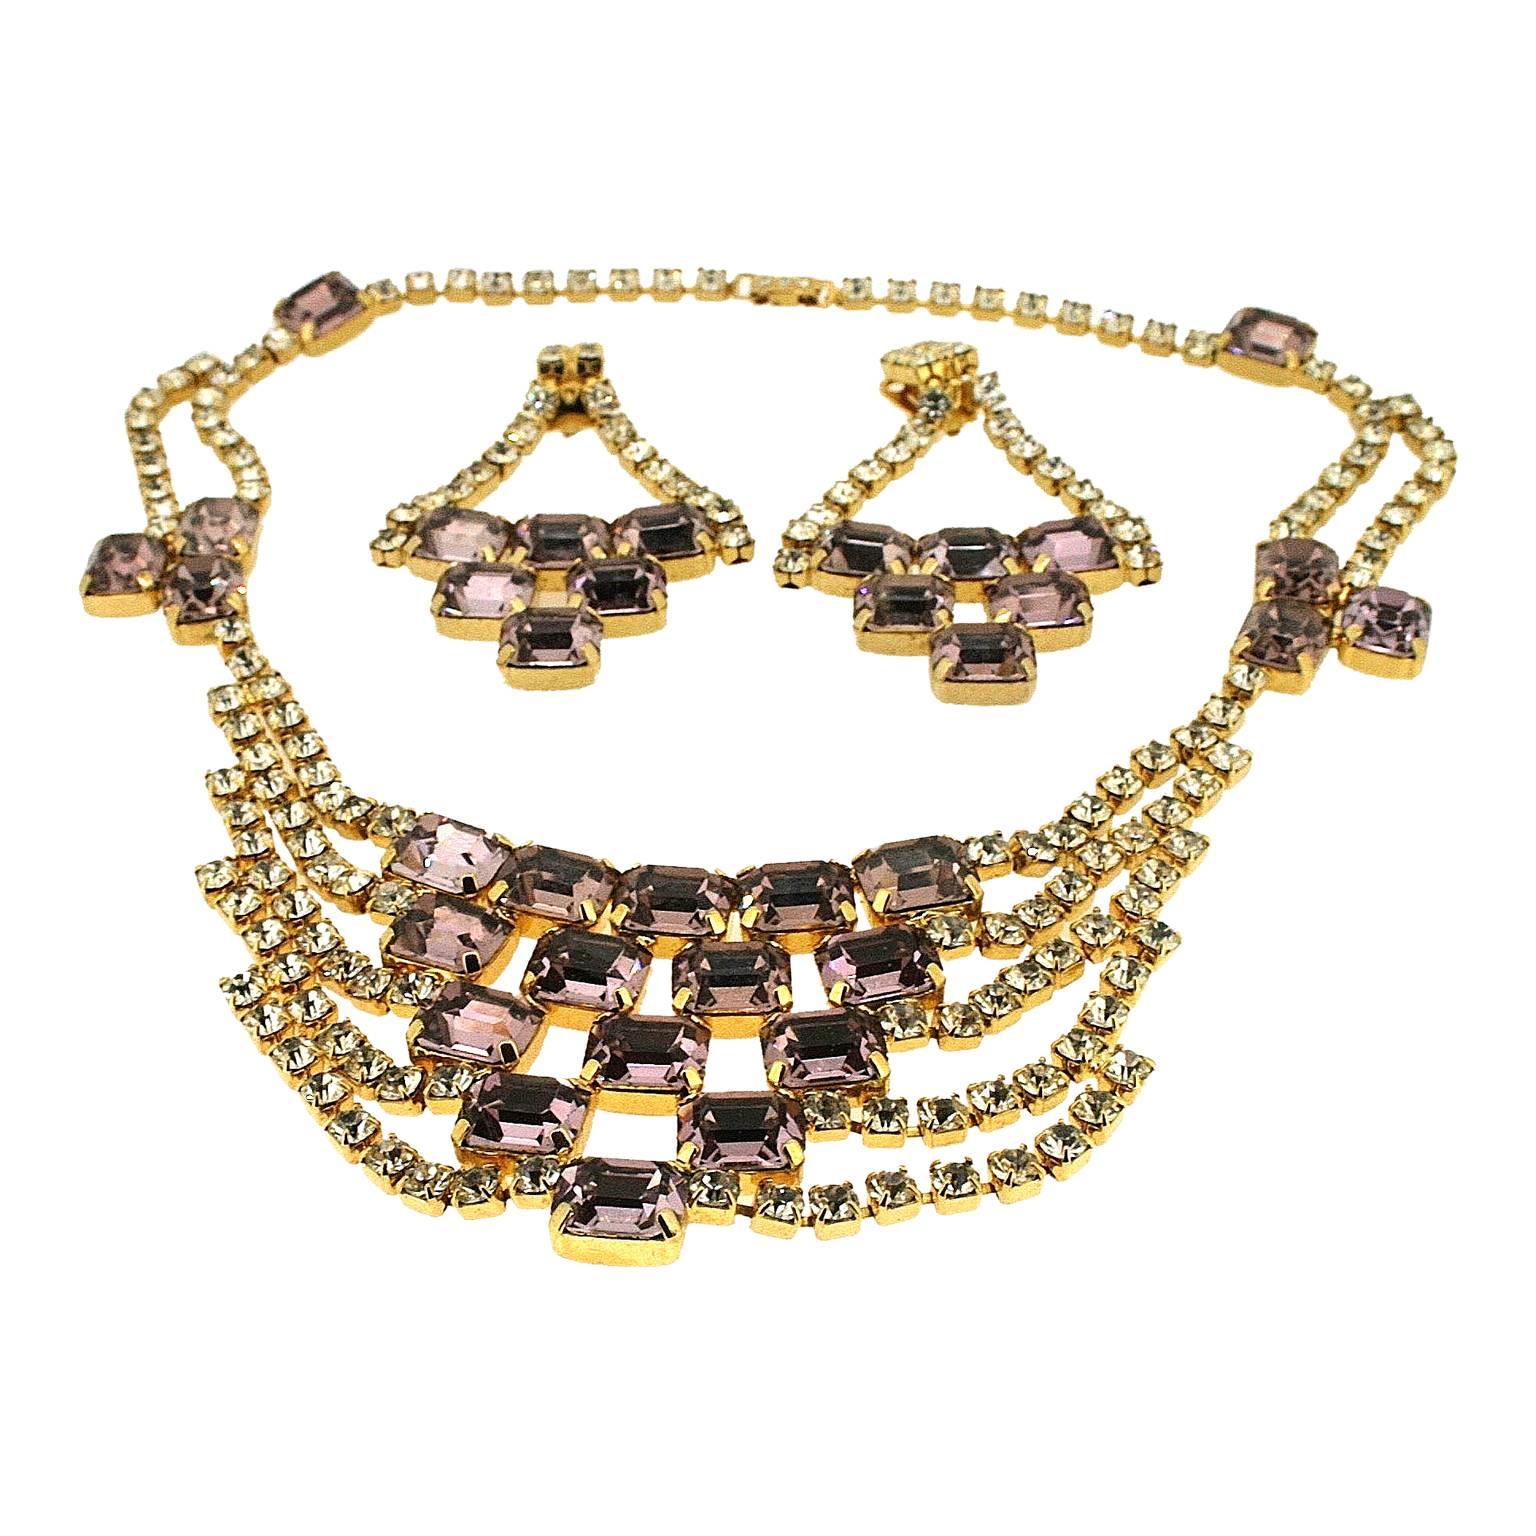 This wonderful example of 1960s cocktail jewellery is an unsigned, high quality necklace and earrings set. 
Condition Report:
Excellent
The Details...
This jewellery set includes a necklace and earrings. Both pieces feature large, emerald cut, lilac